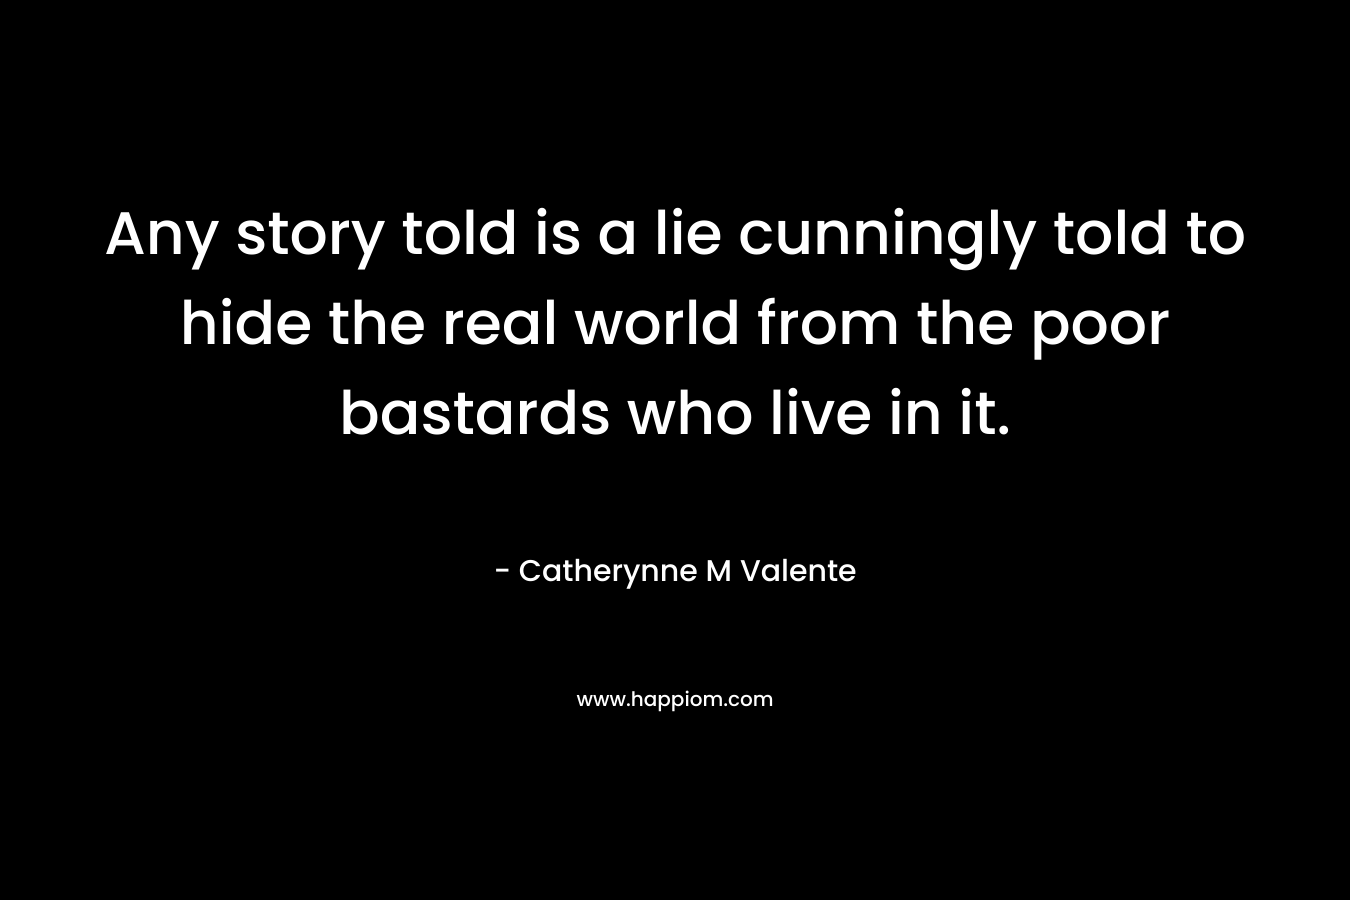 Any story told is a lie cunningly told to hide the real world from the poor bastards who live in it. – Catherynne M Valente